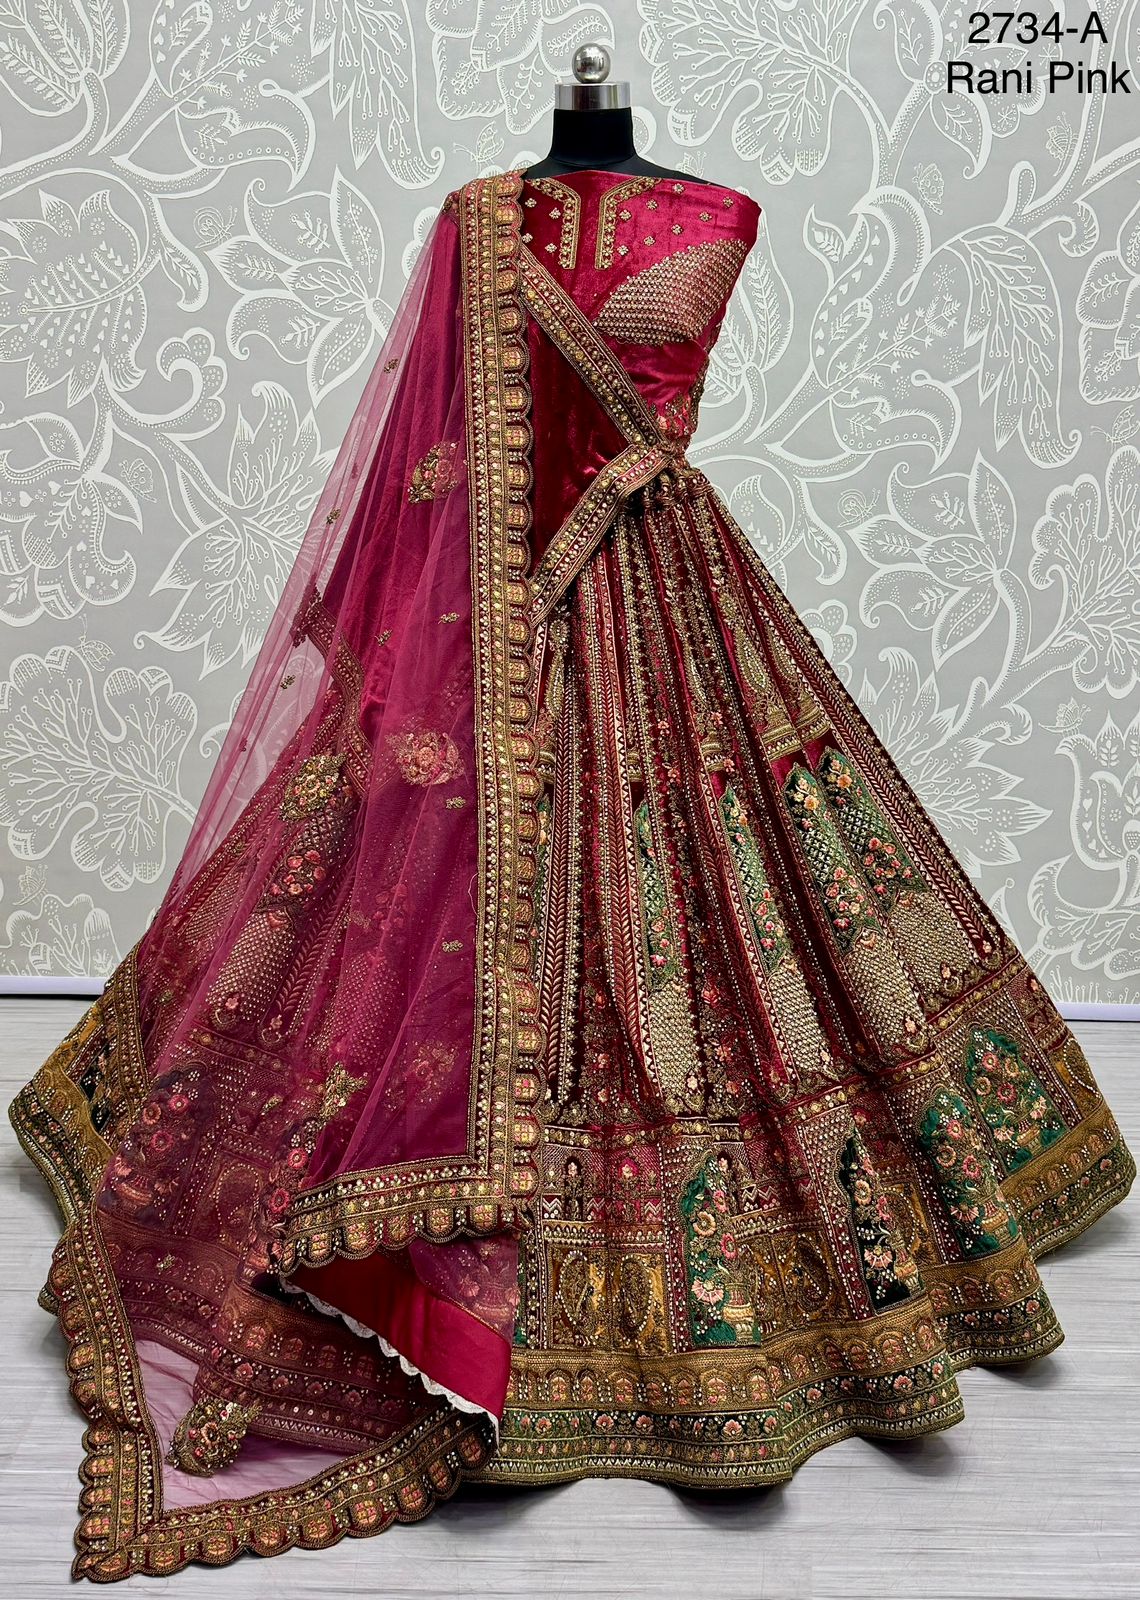 New Velvet Designed Embroidered Patchwork with Dori, Multi Thread, and diamond work Lehenga Choli Collection for bridal